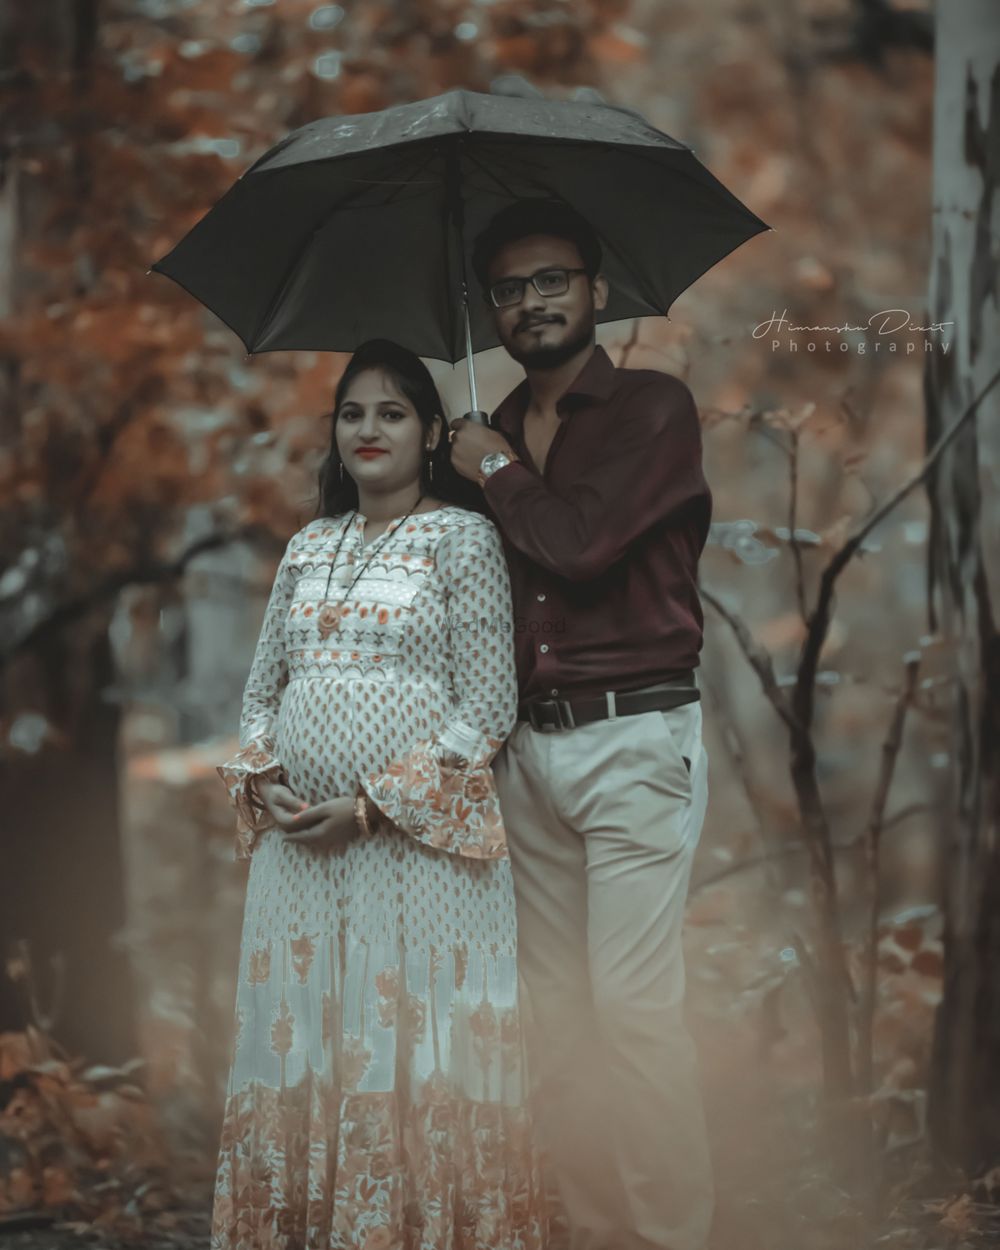 Photo From Maternity shoot - By Himanshu Dixit Photography